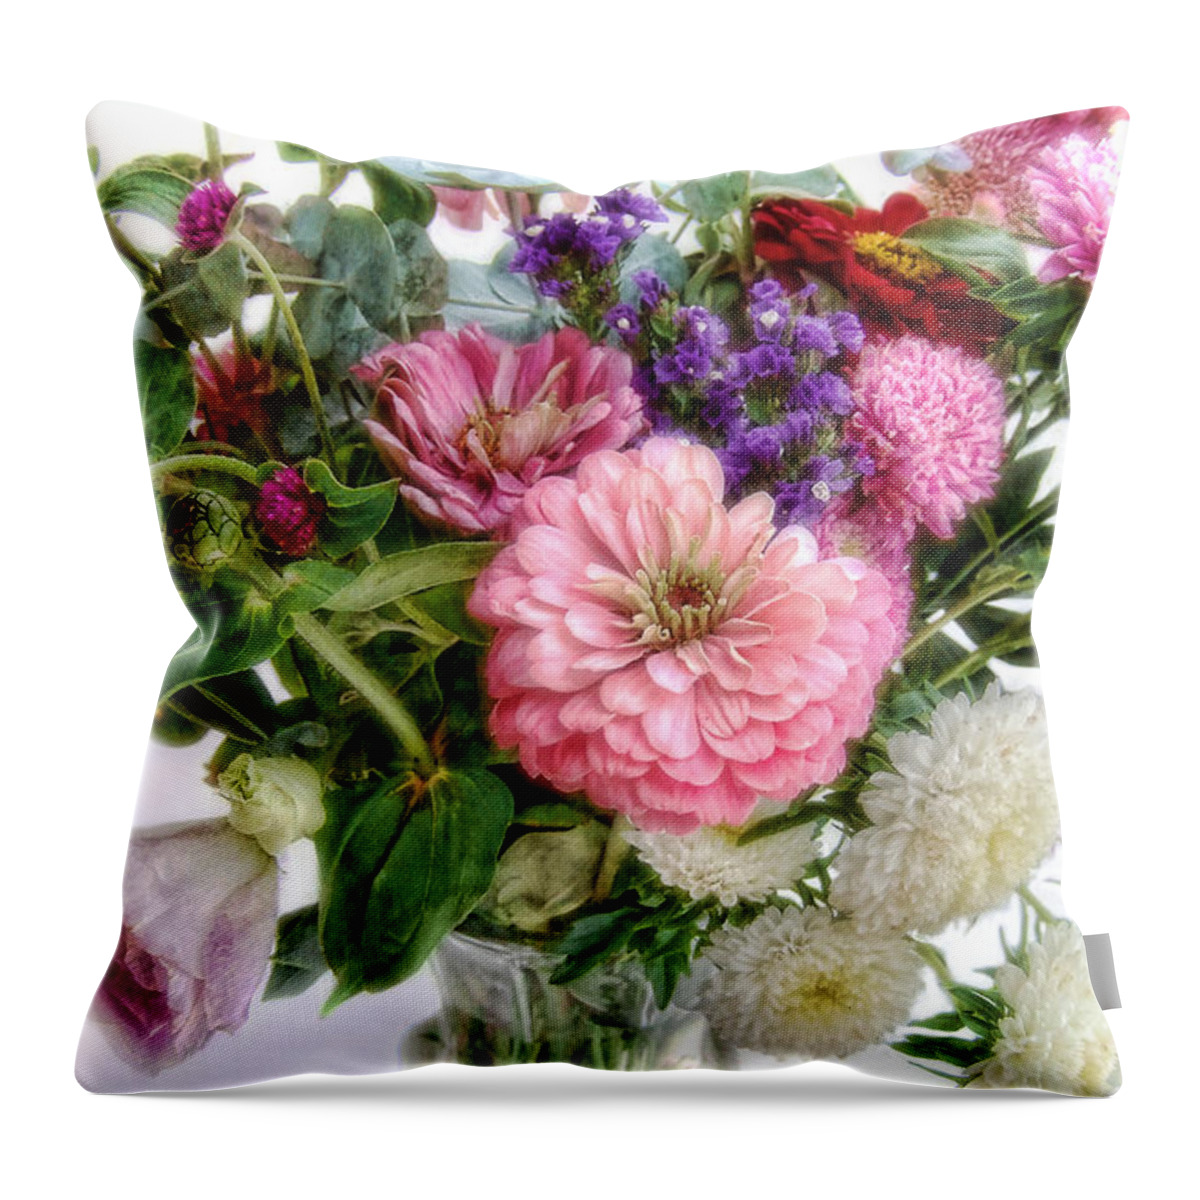 Flowers Throw Pillow featuring the photograph Summer Bouquet by Louise Kumpf